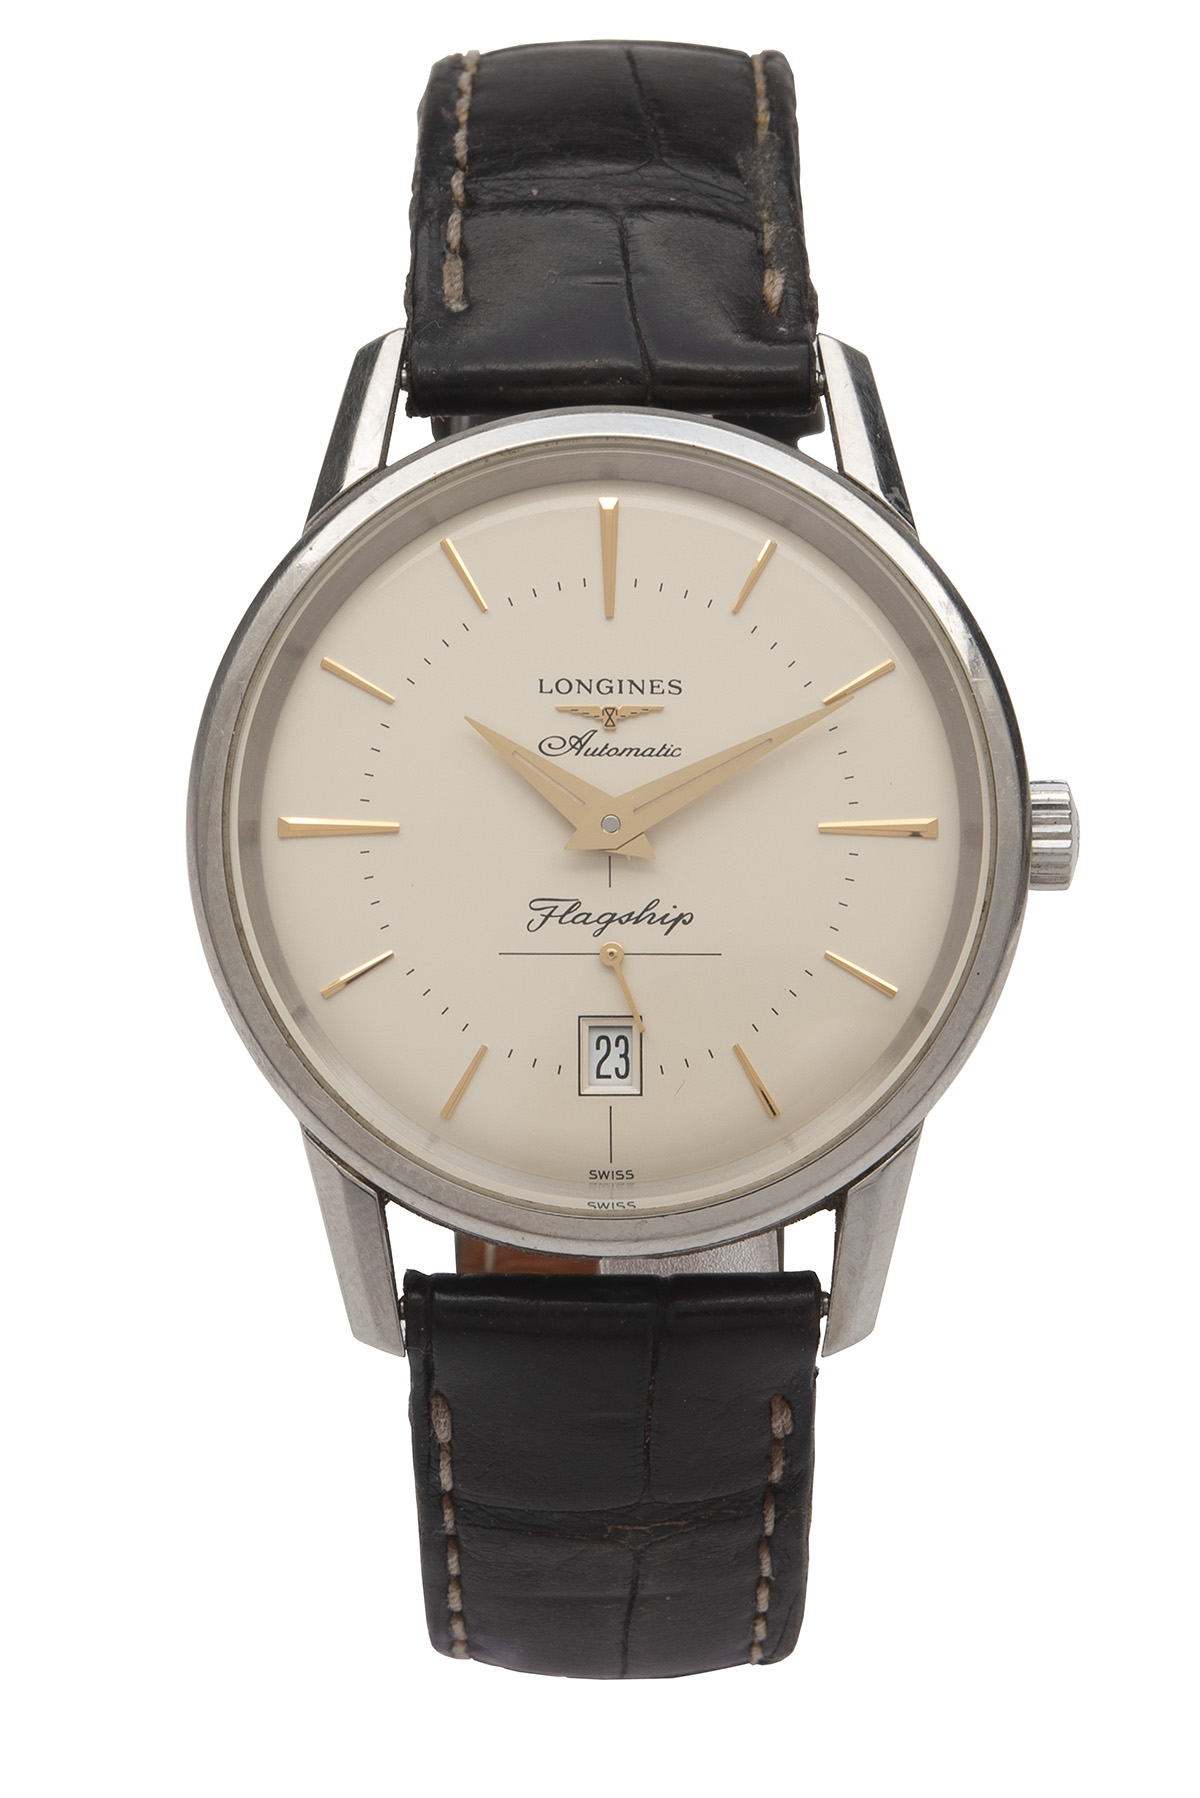 LONGINES A BOXED 'HERITAGE FLAGSHIP' GENTLEMAN'S CALENDAR AUTOMATIC WRISTWATCH, serial no. 48490419,